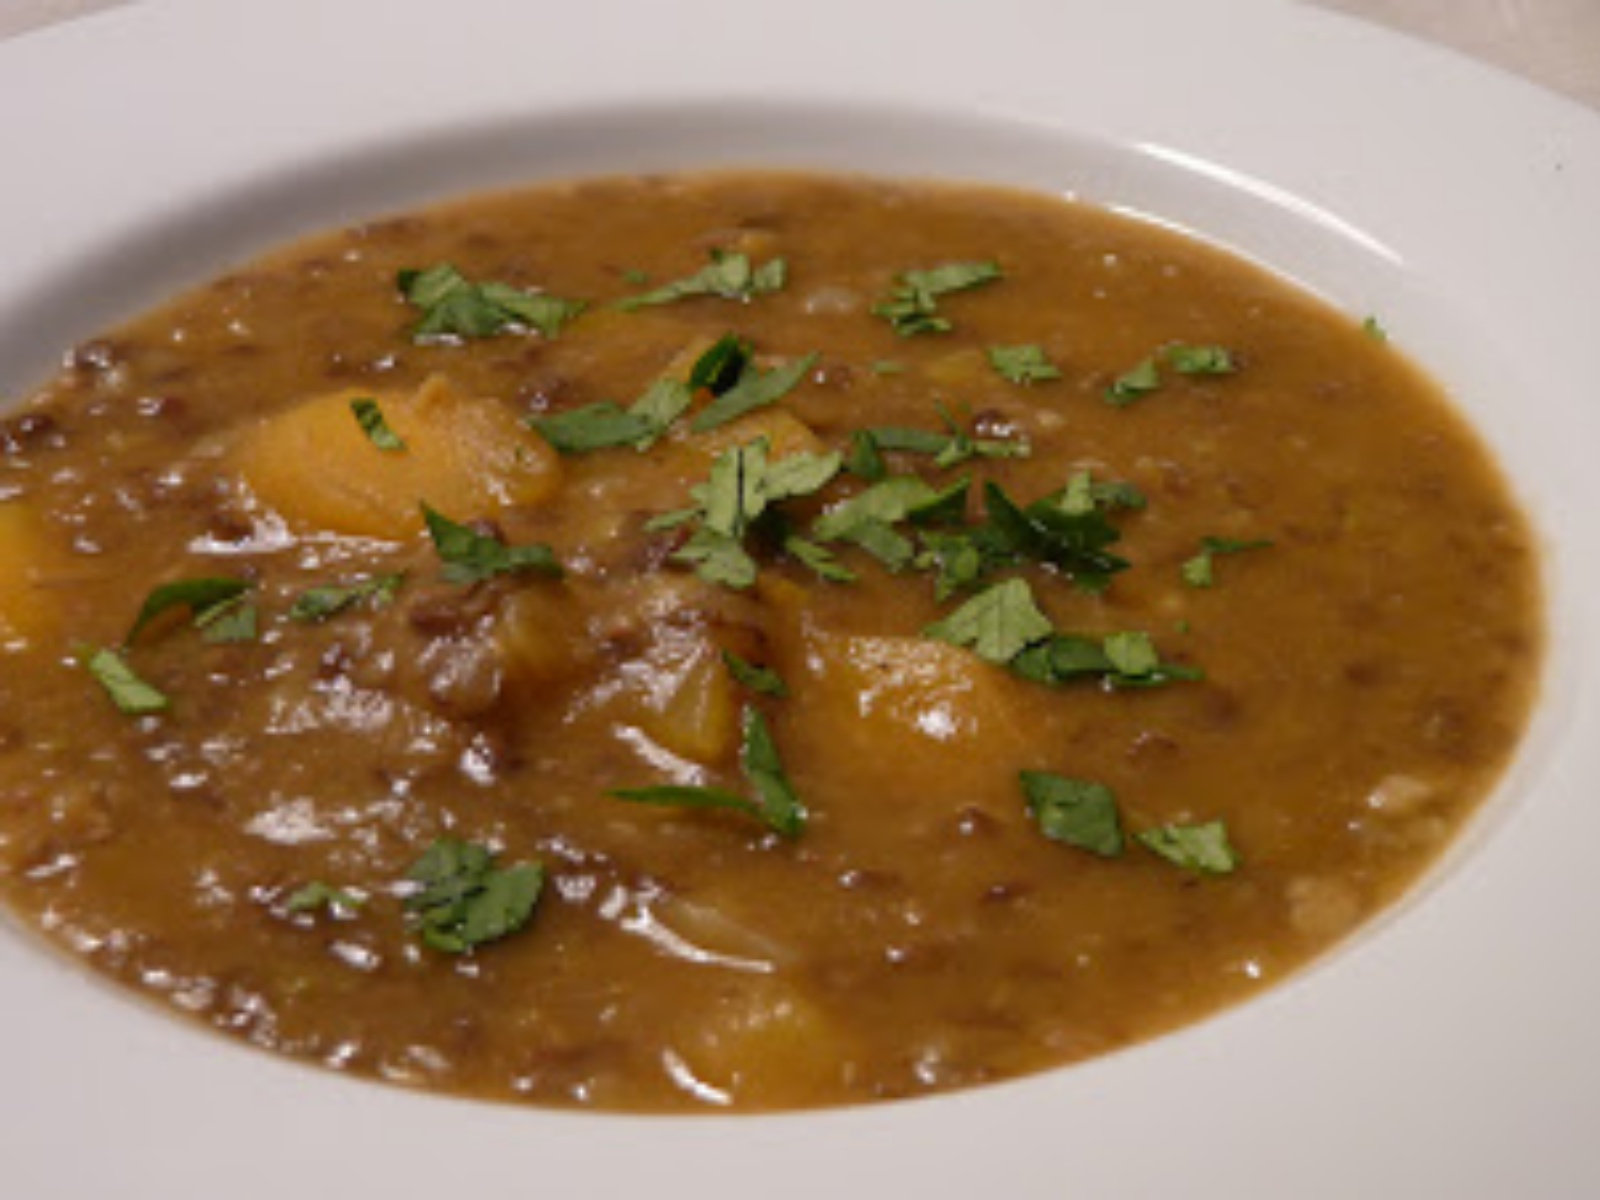 Simple lentil soup with leek and yellow carrots